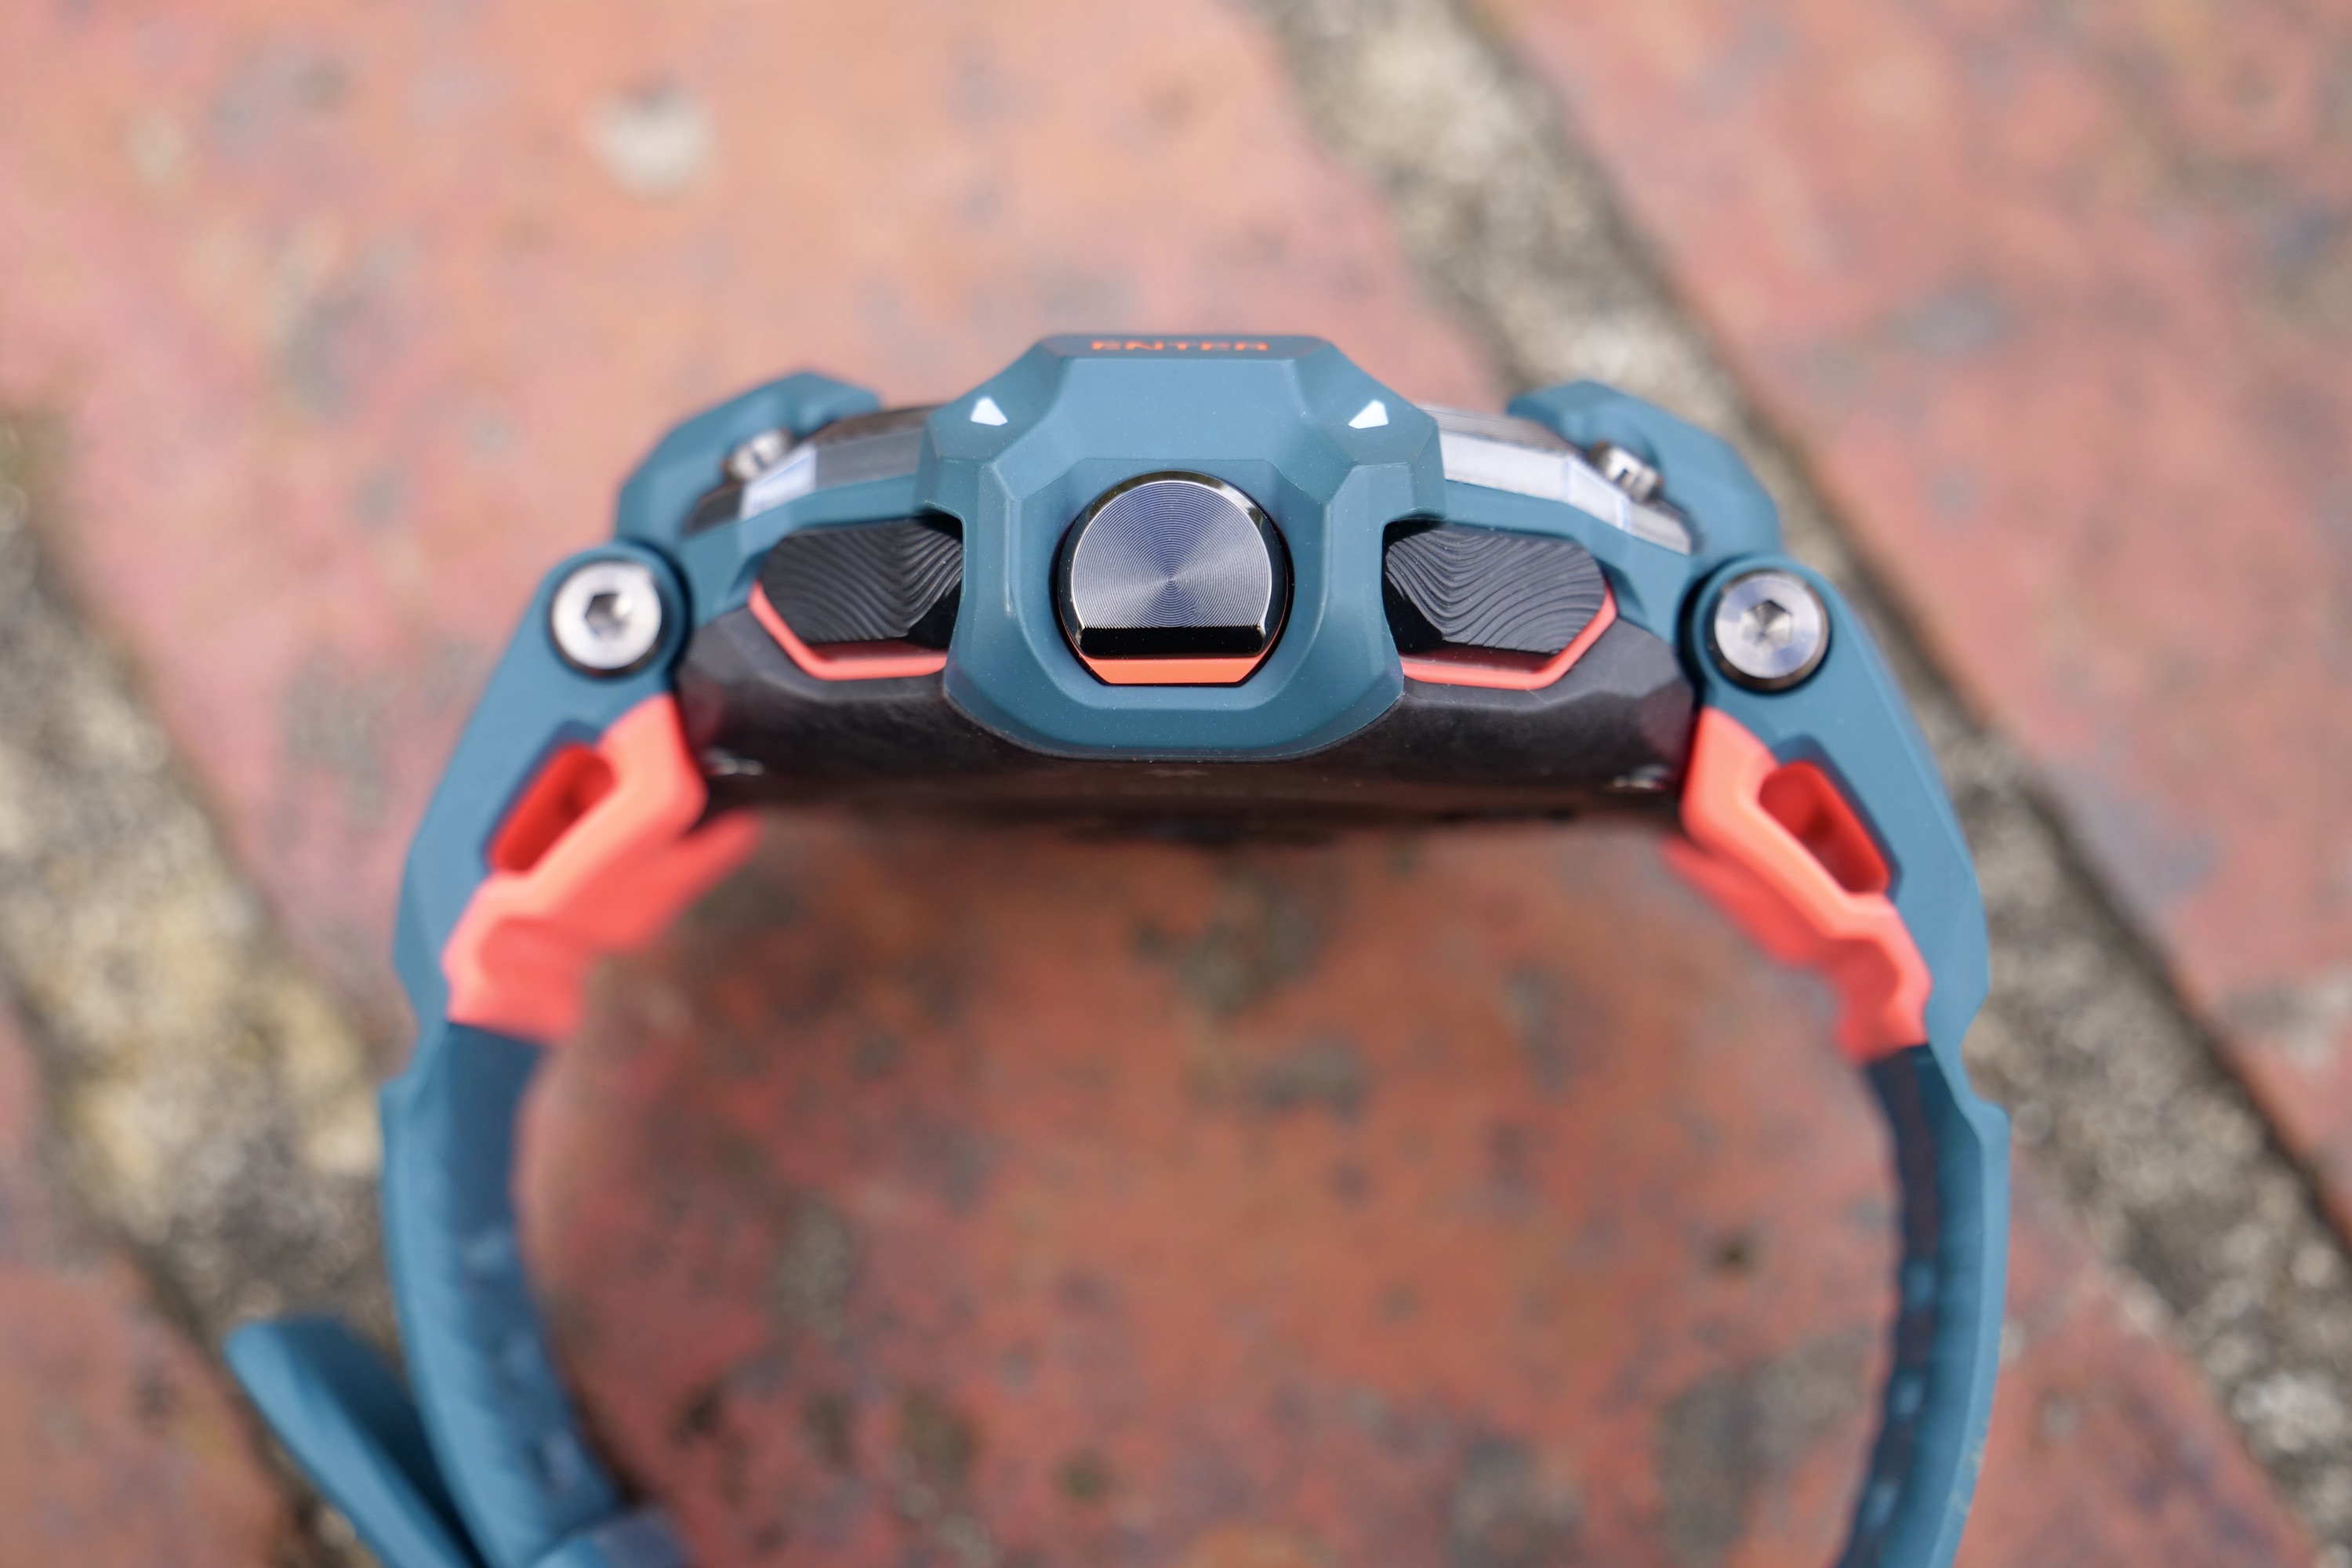 The side of the G-Shock GBD-H2000.